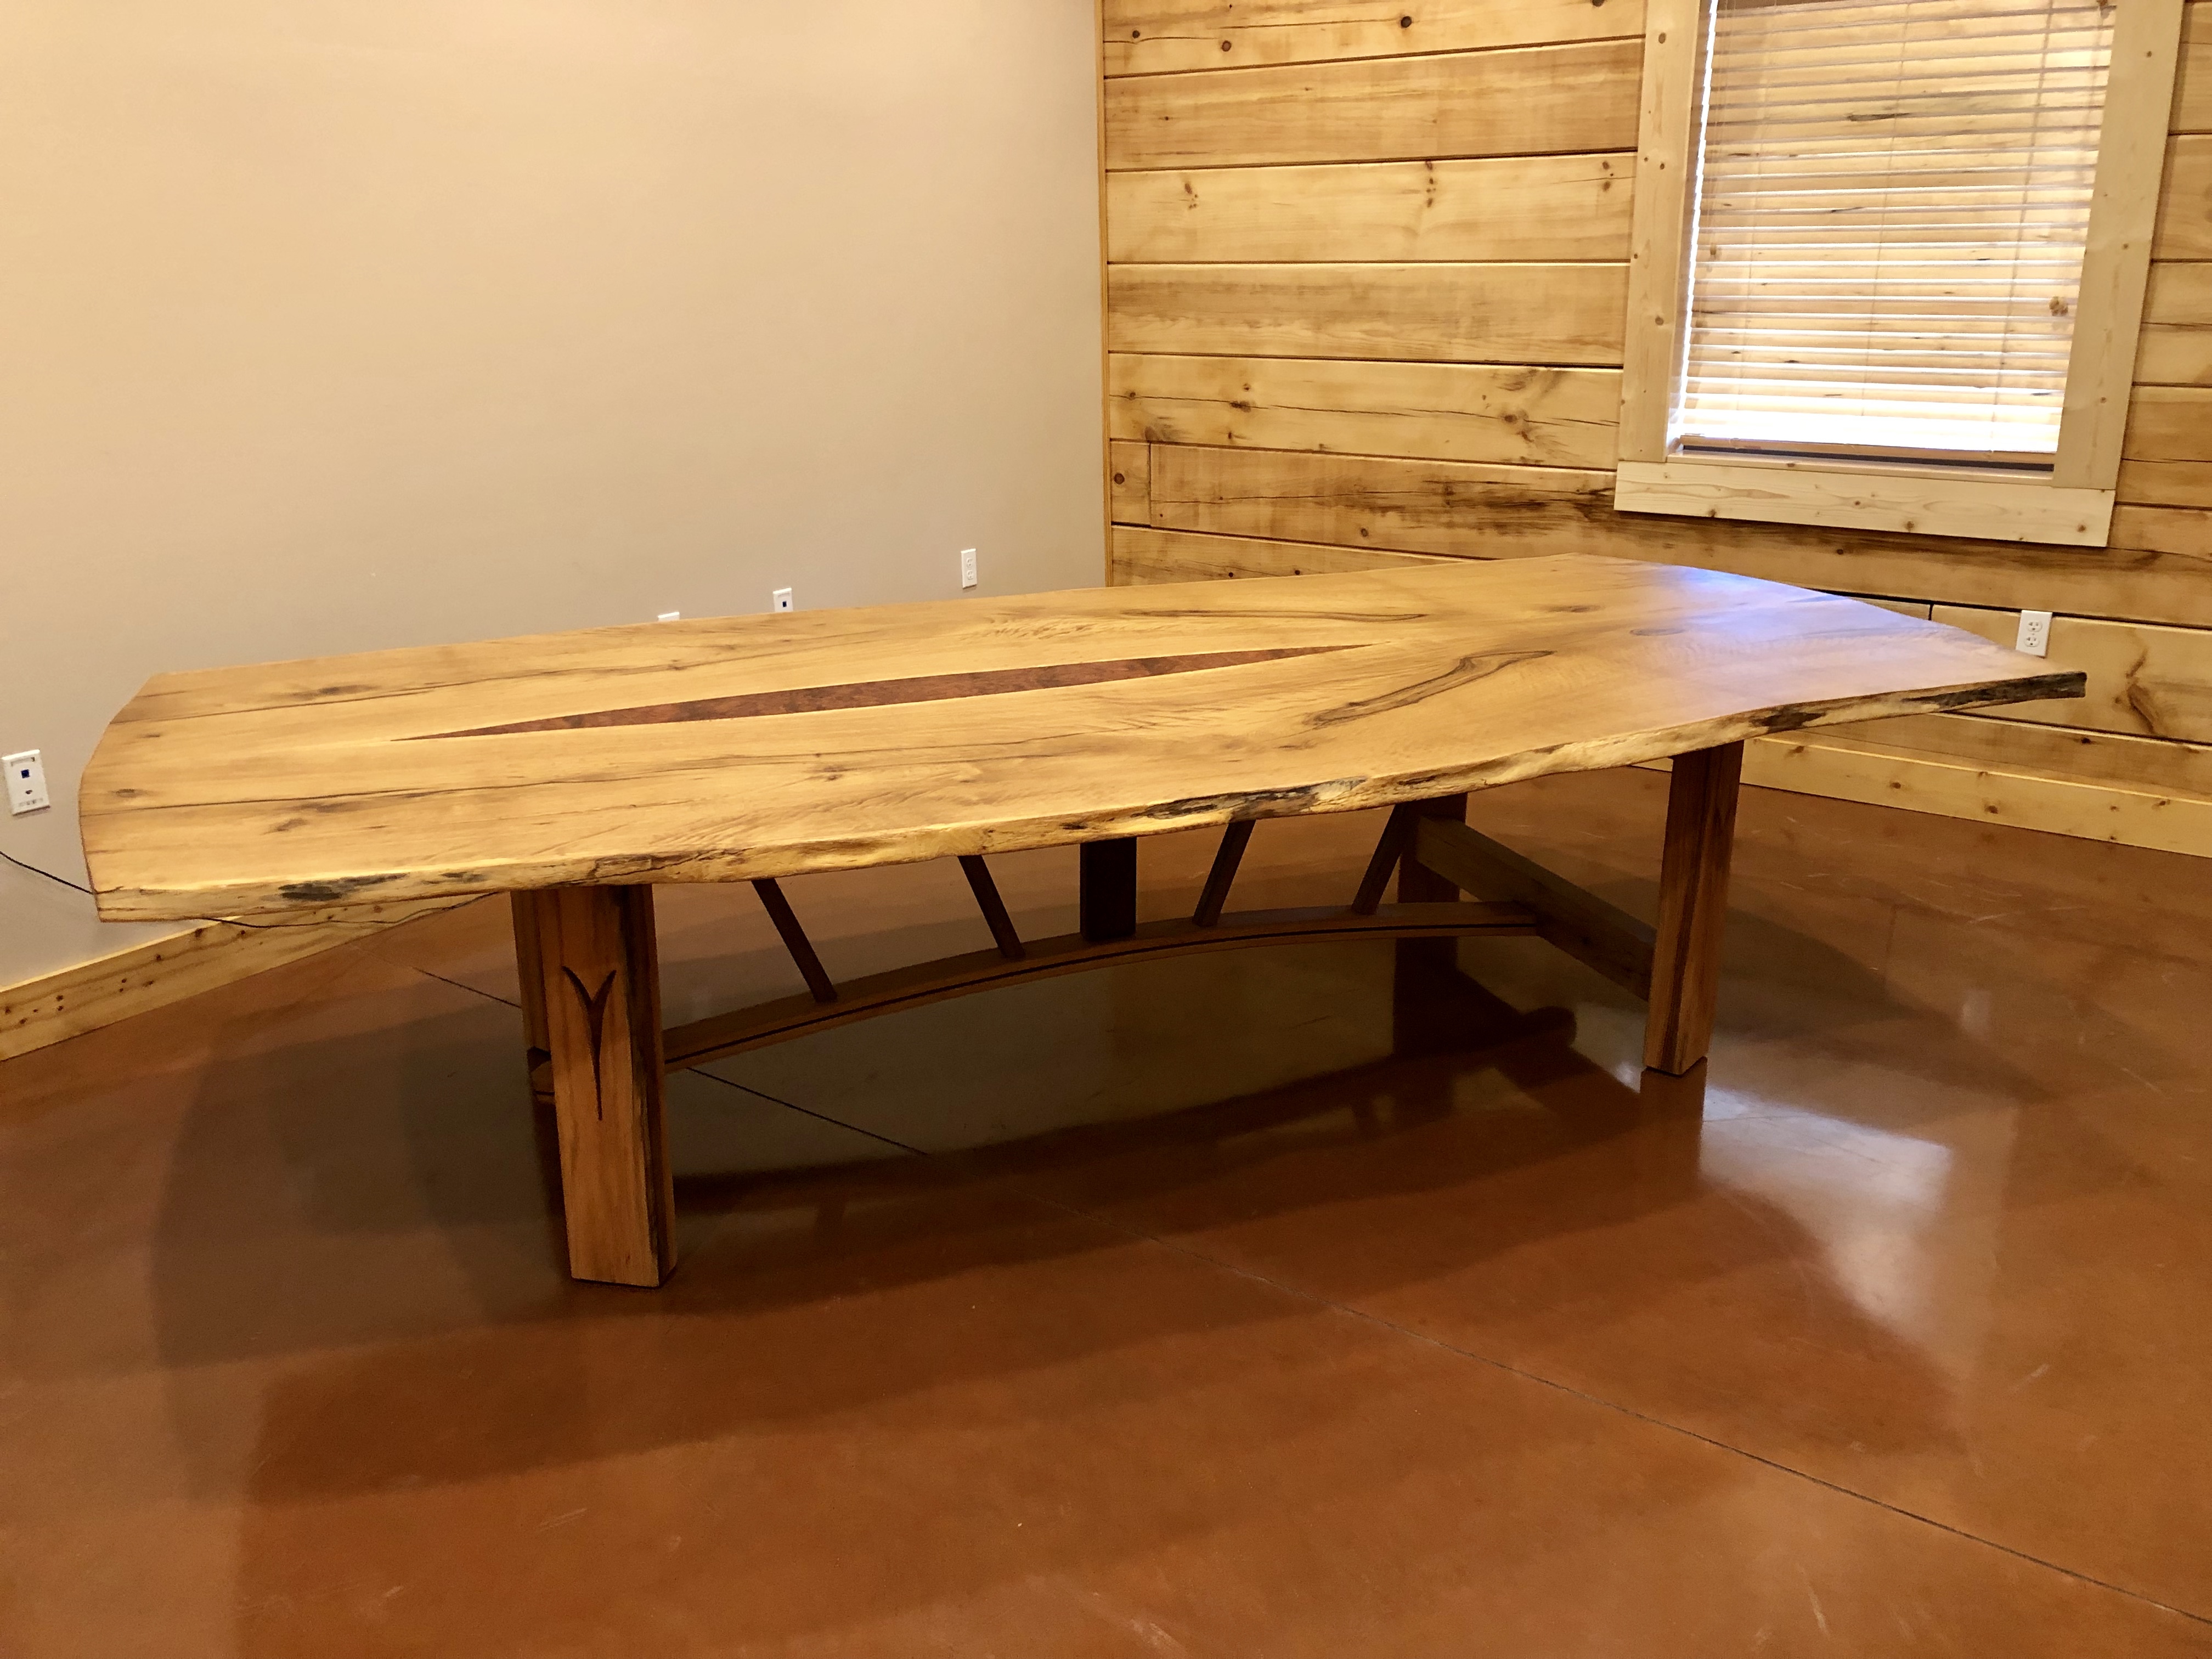 Large live edge conference table made of red oak. the dementions of this table are six feet wide and ten feet long. this table features a trestle style base with custom inlay built into the legs.
